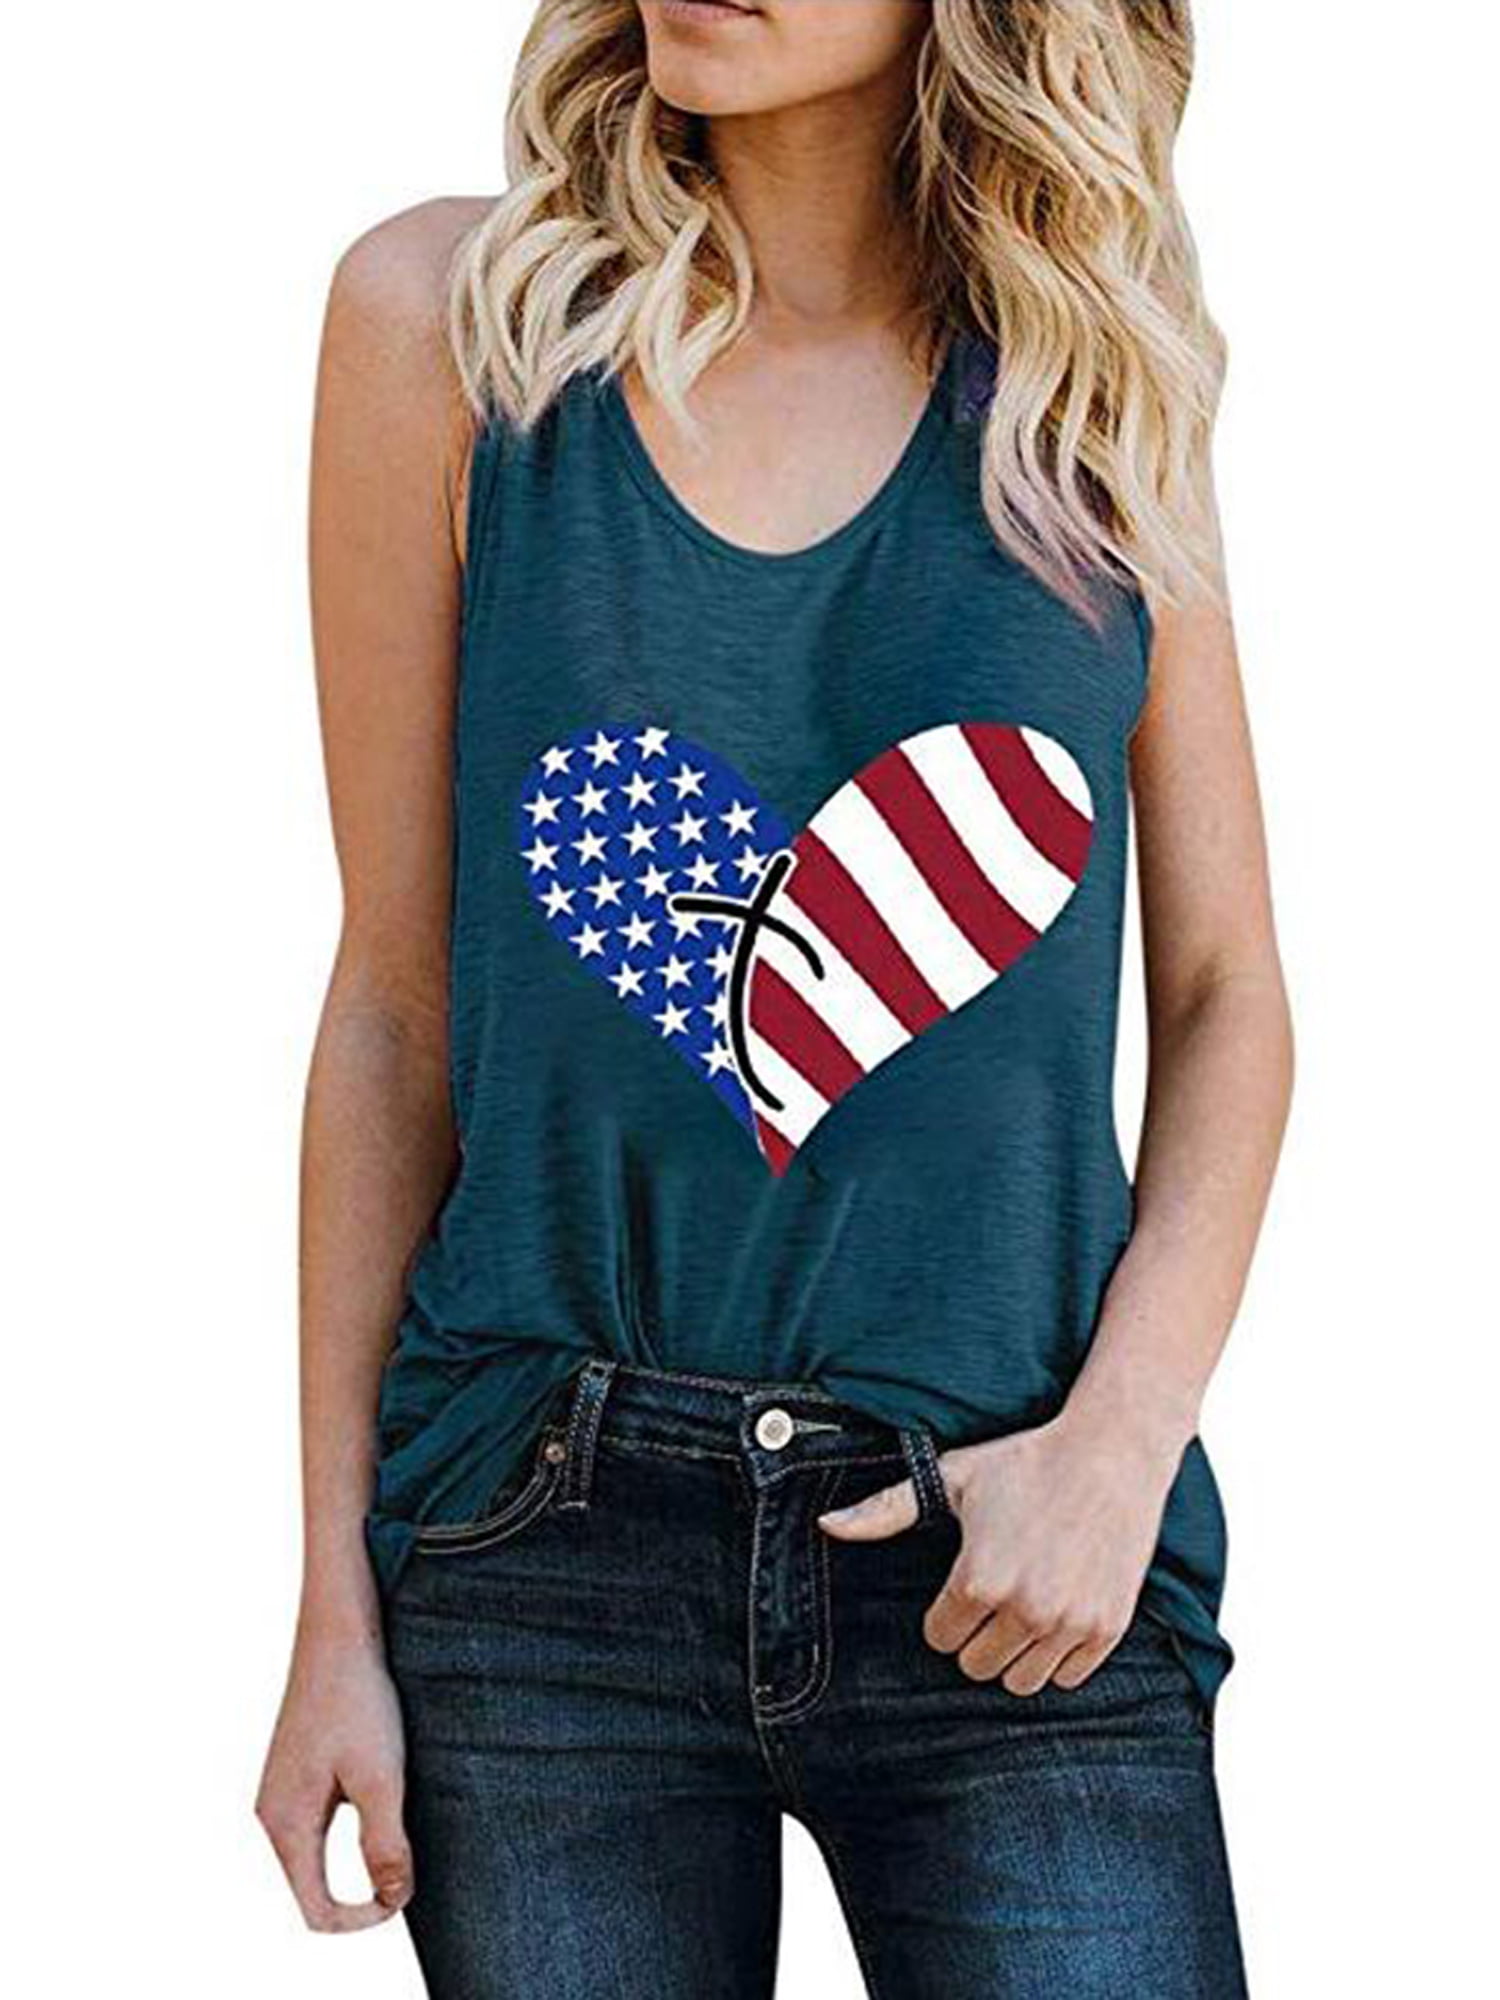 iSovze Independence Day Womens Love Printing Round Neck Short Sleeve T-Shirt